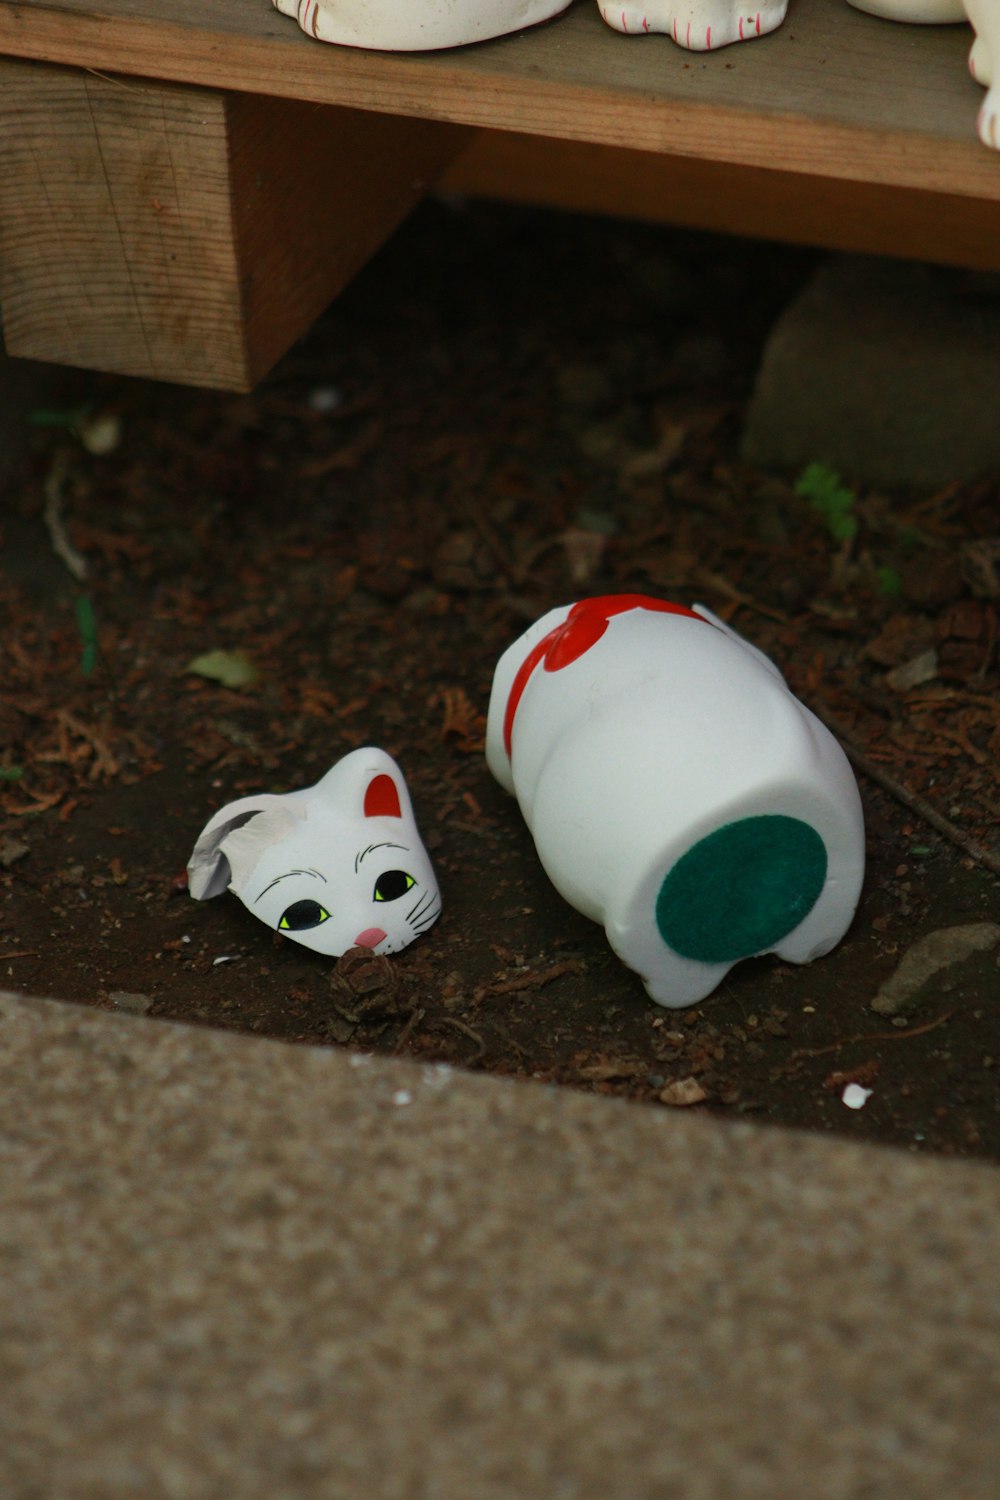 a white cat and a white cat figurine on the ground